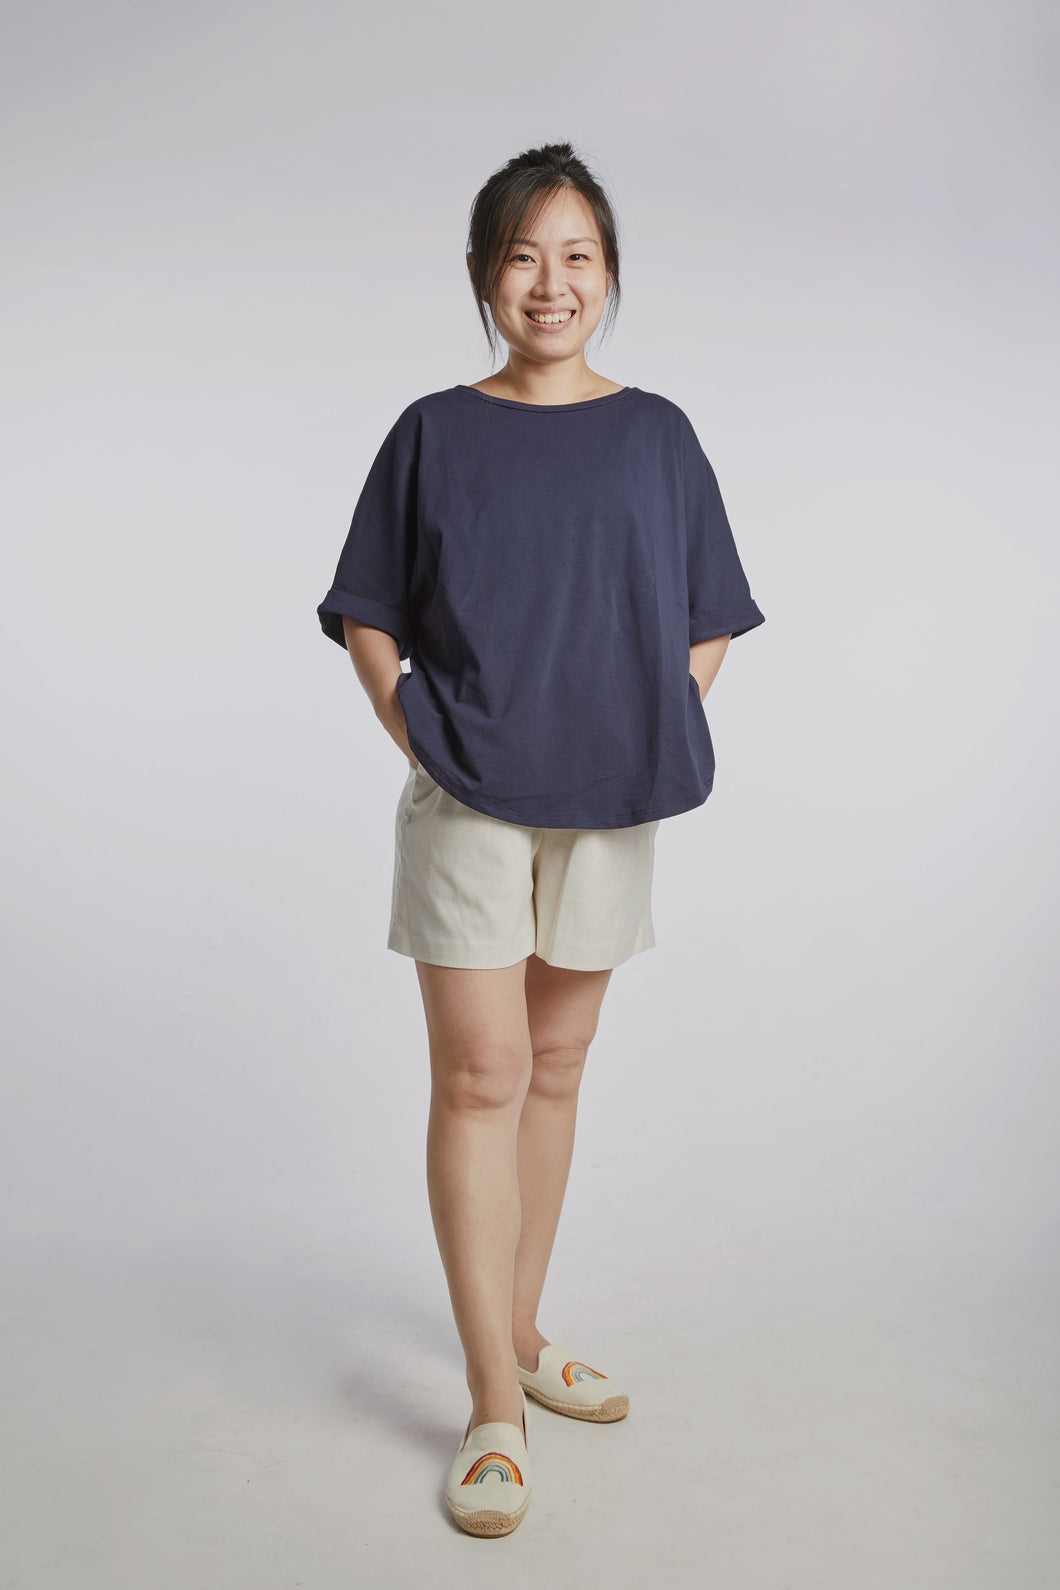 A Mighty Top (Midnight Blue) - Size XL